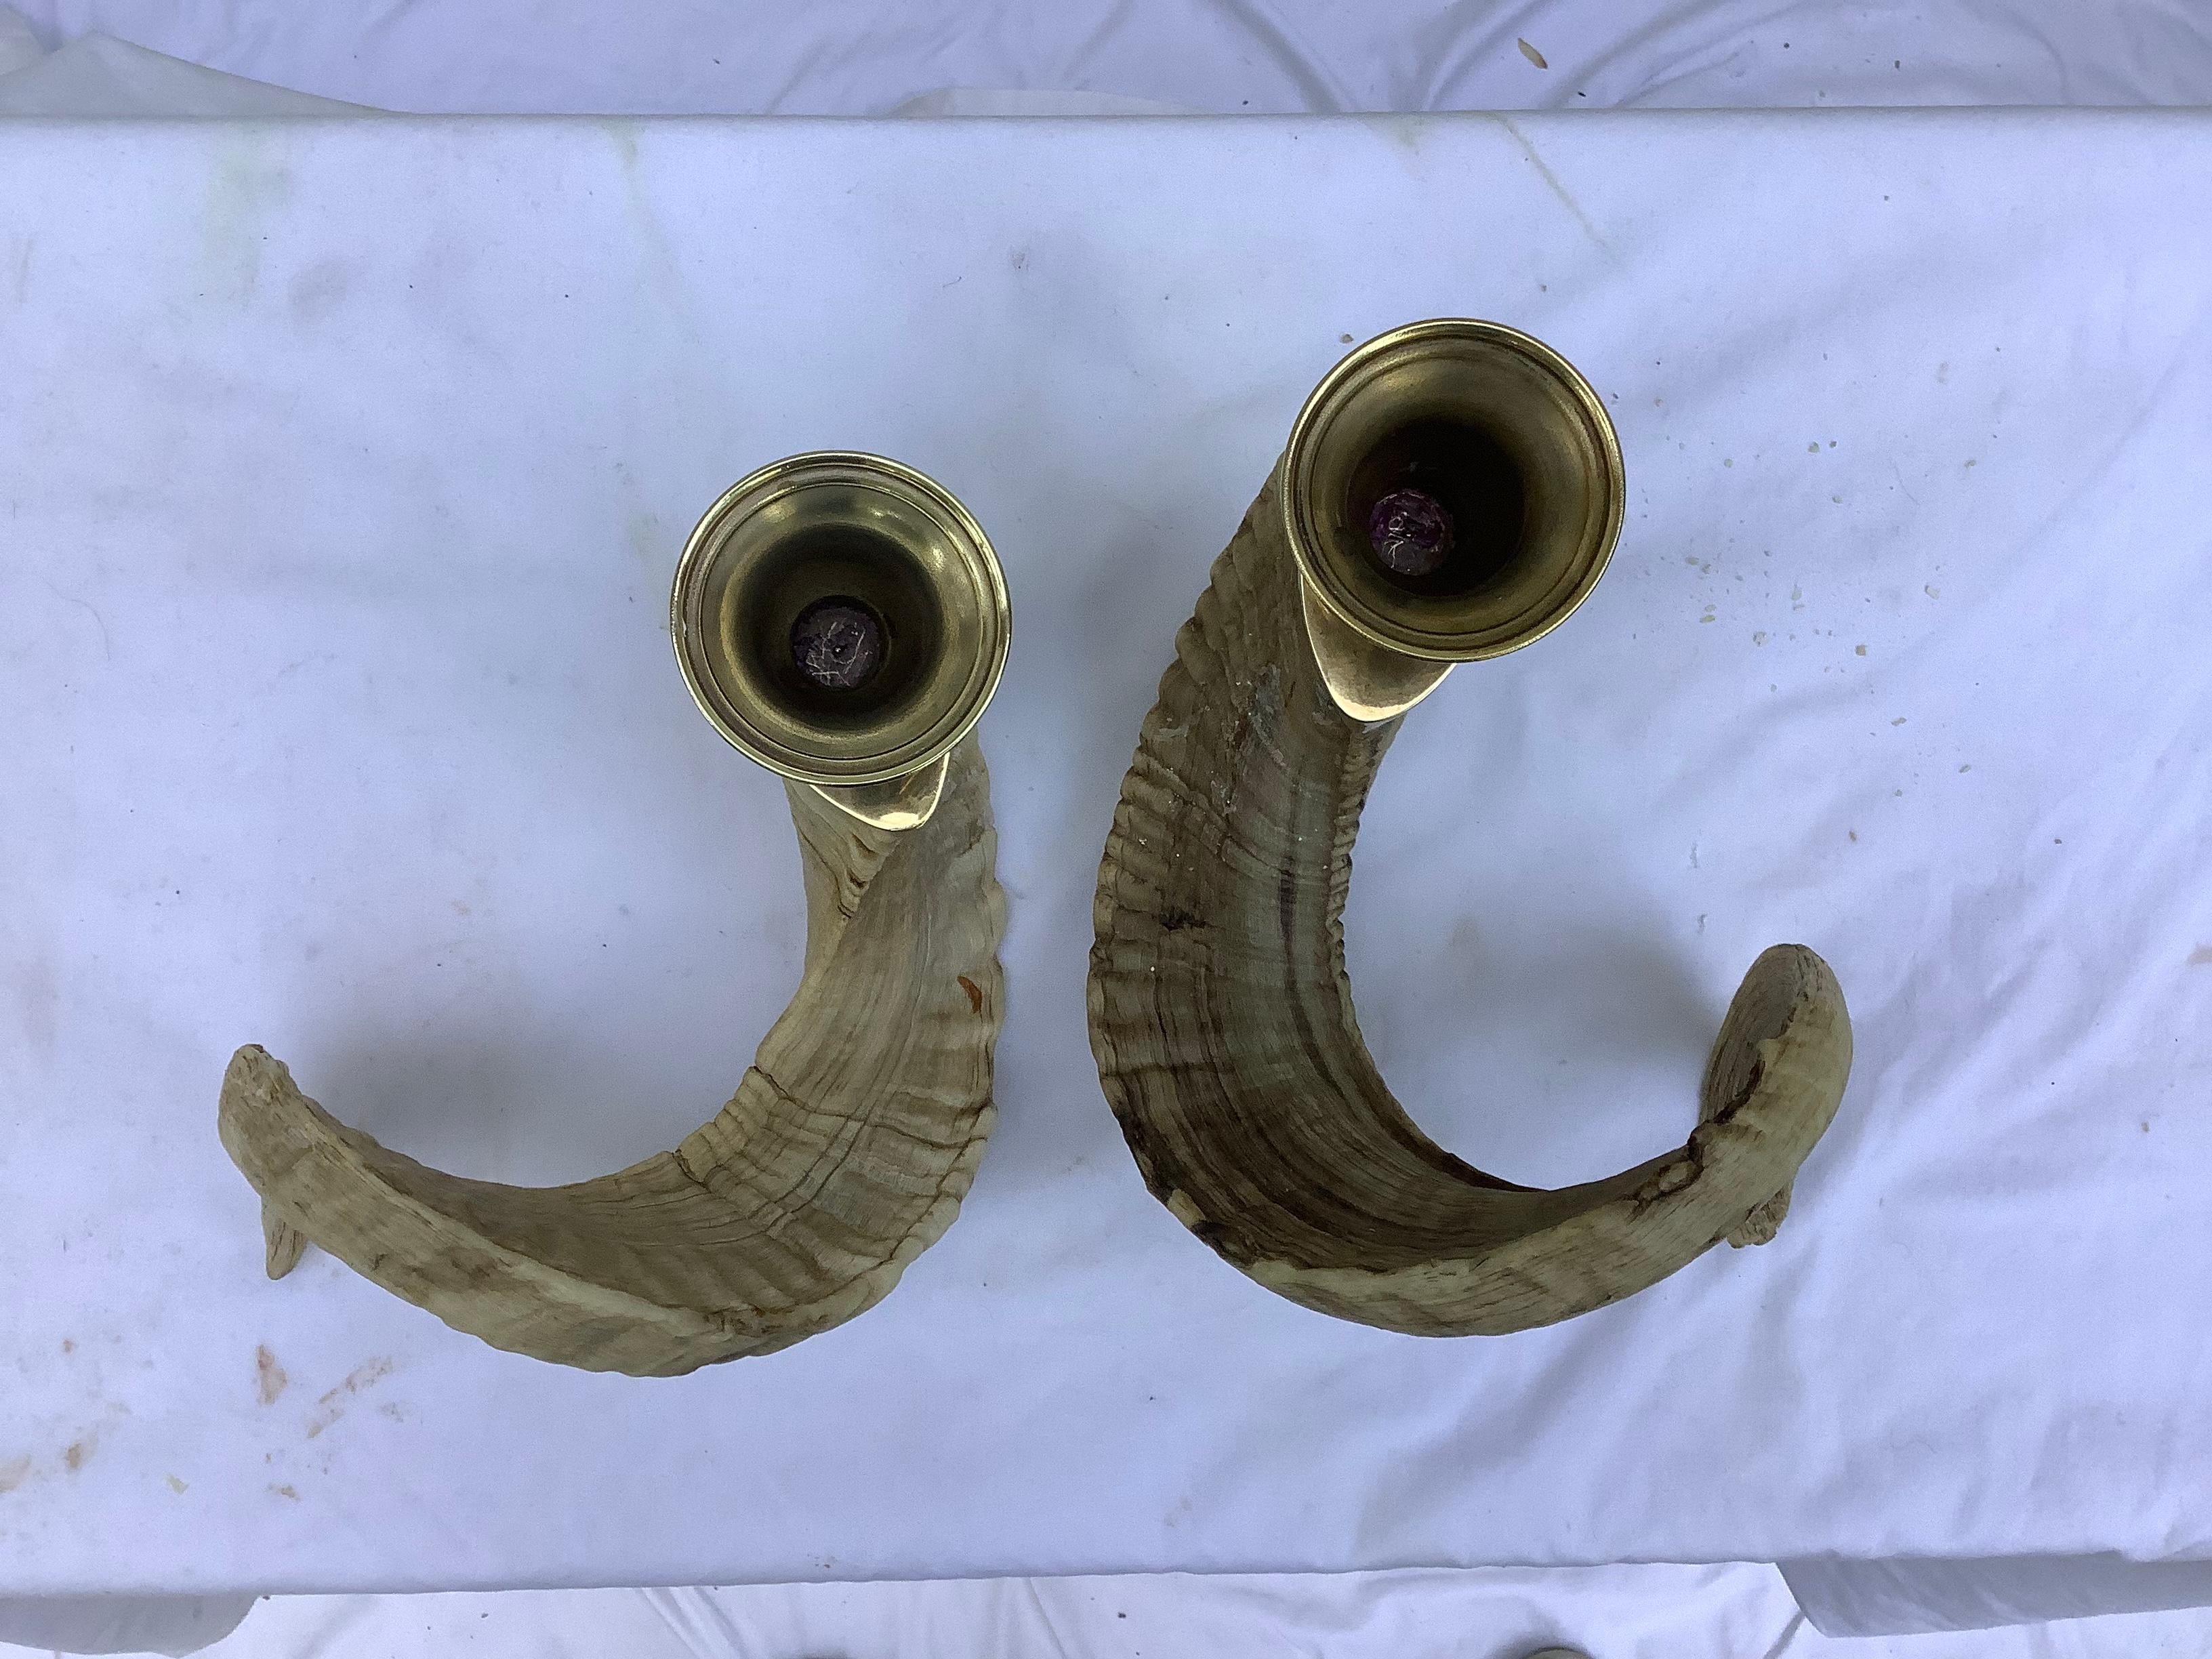 The candleholders are very reminiscent of Carl Aubock, who loved to work with horn &brass. Mid century, with original patina & wear. Very handsome!.